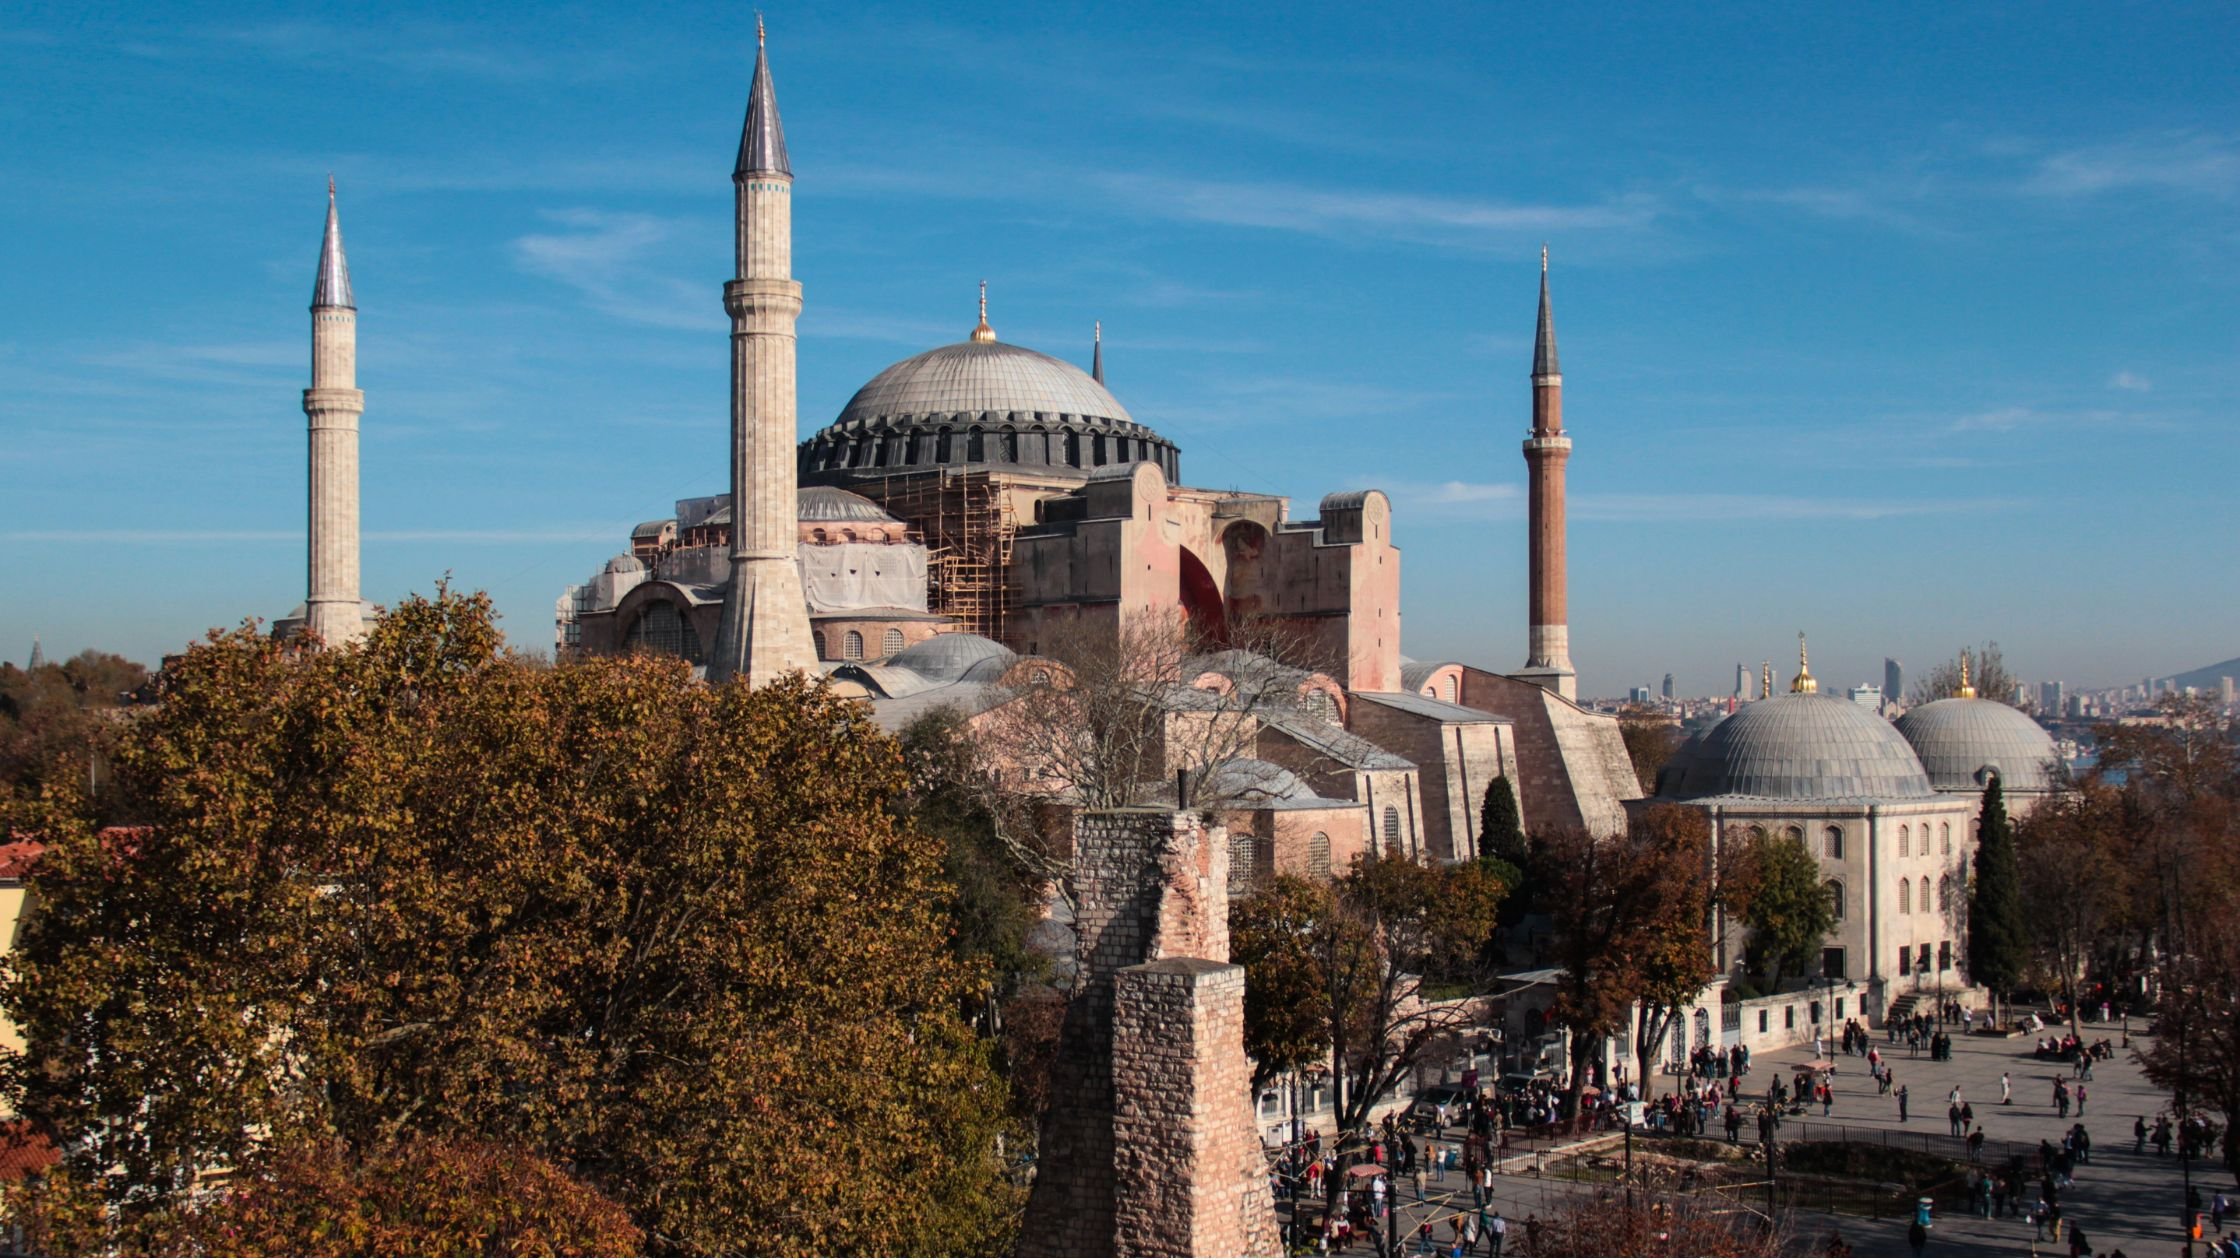 Hagia Sophia is an imposing building built between 532 and 537 by the Byzantine Empire to be the cathedral of Constantinople.